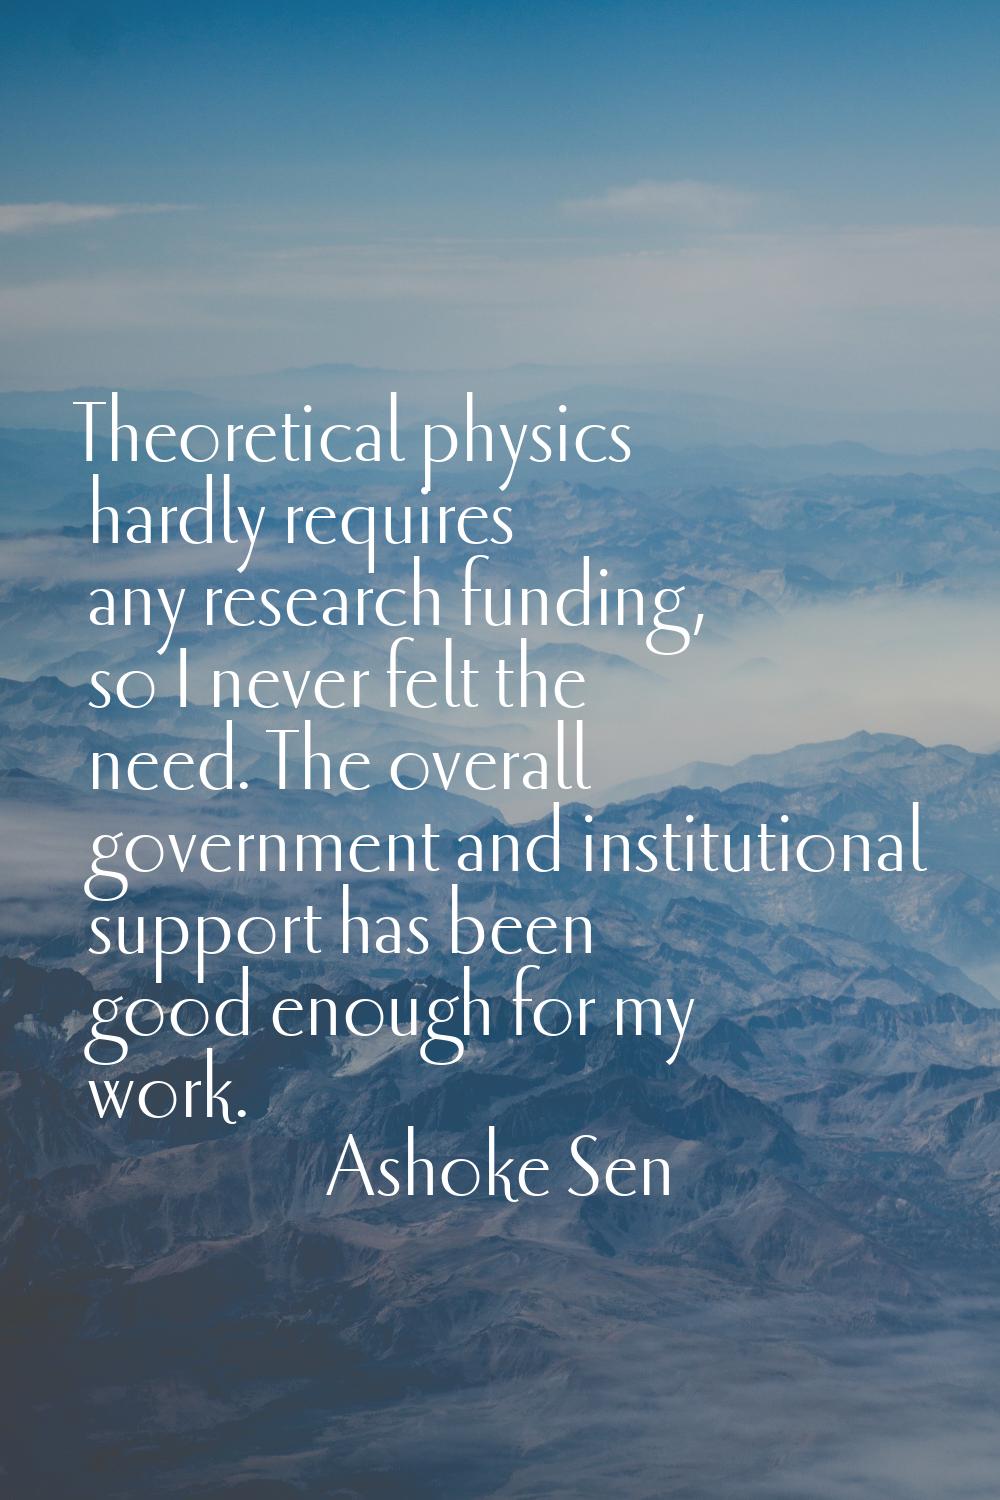 Theoretical physics hardly requires any research funding, so I never felt the need. The overall gov